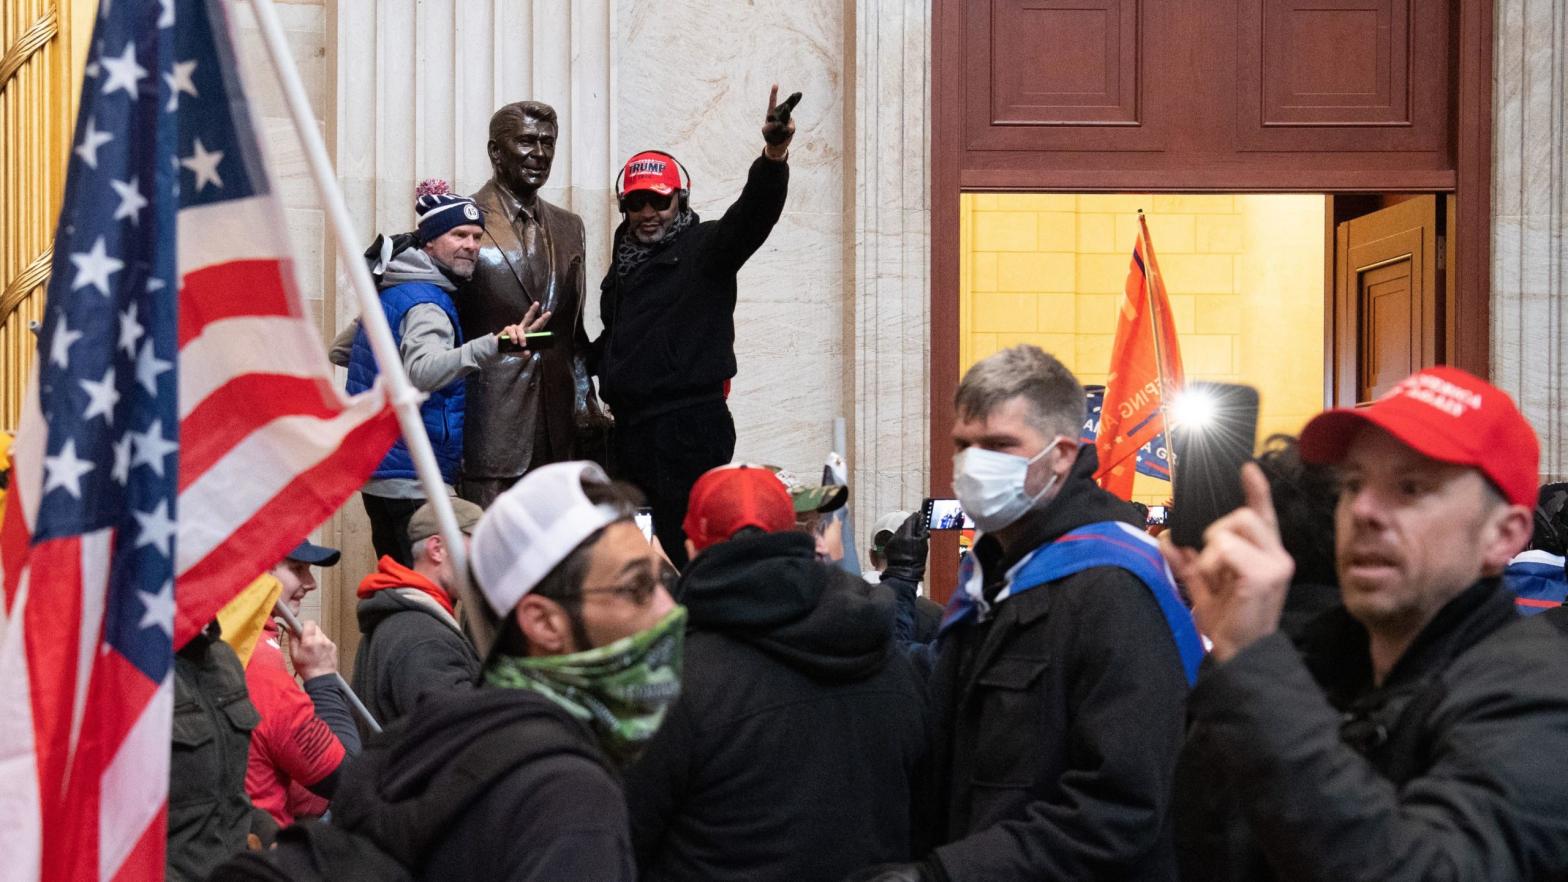 Neo-fascist supporters of President Donald Trump enter the US Capitol's Rotunda on January 6, 2021, in Washington, D.C.  (Photo: Saul Loeb, Getty Images)